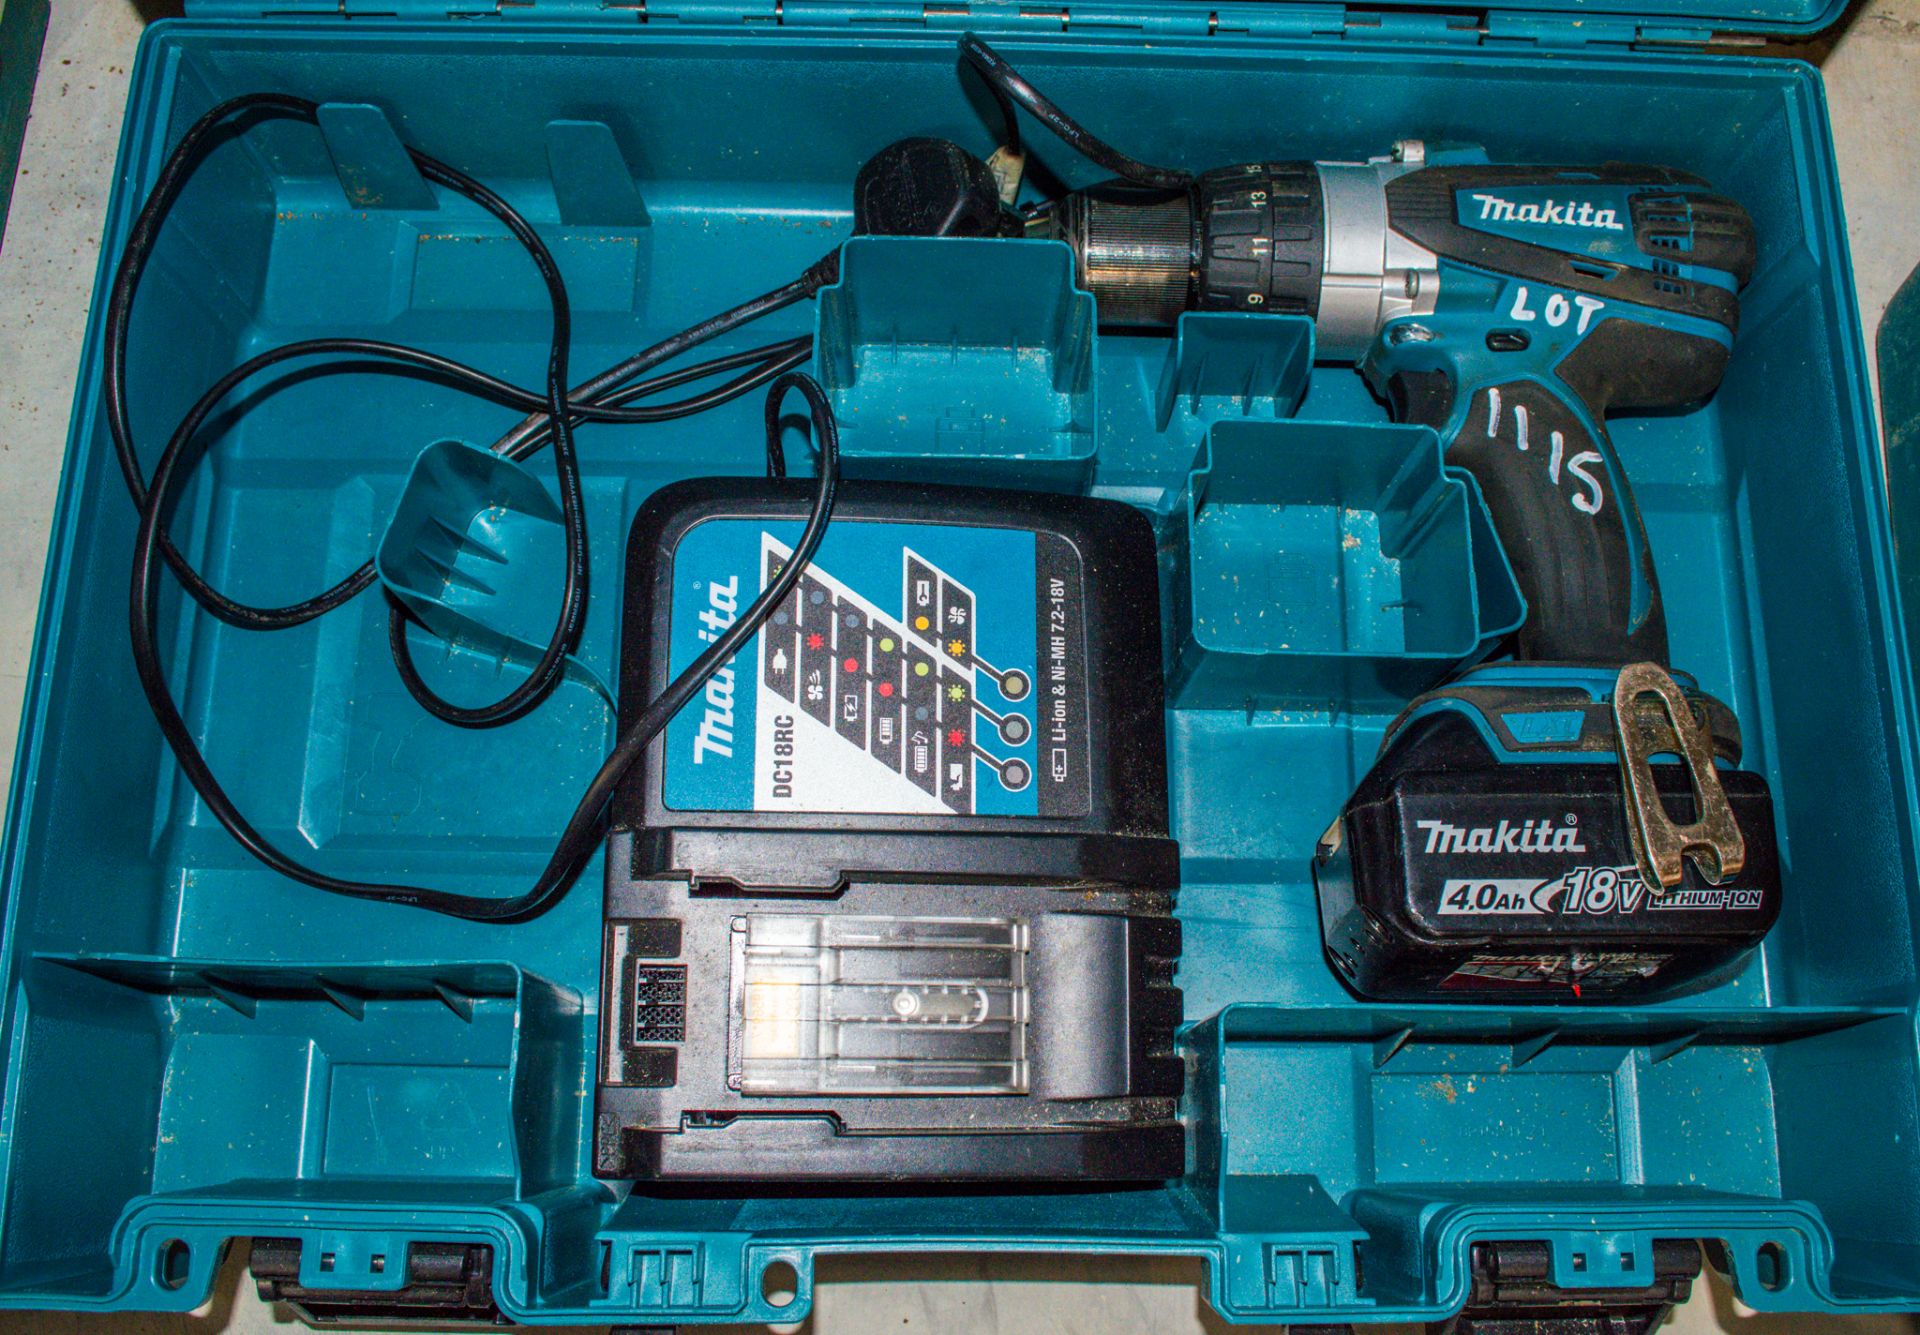 Makita 18v cordless drill c/w charger, battery & carry case